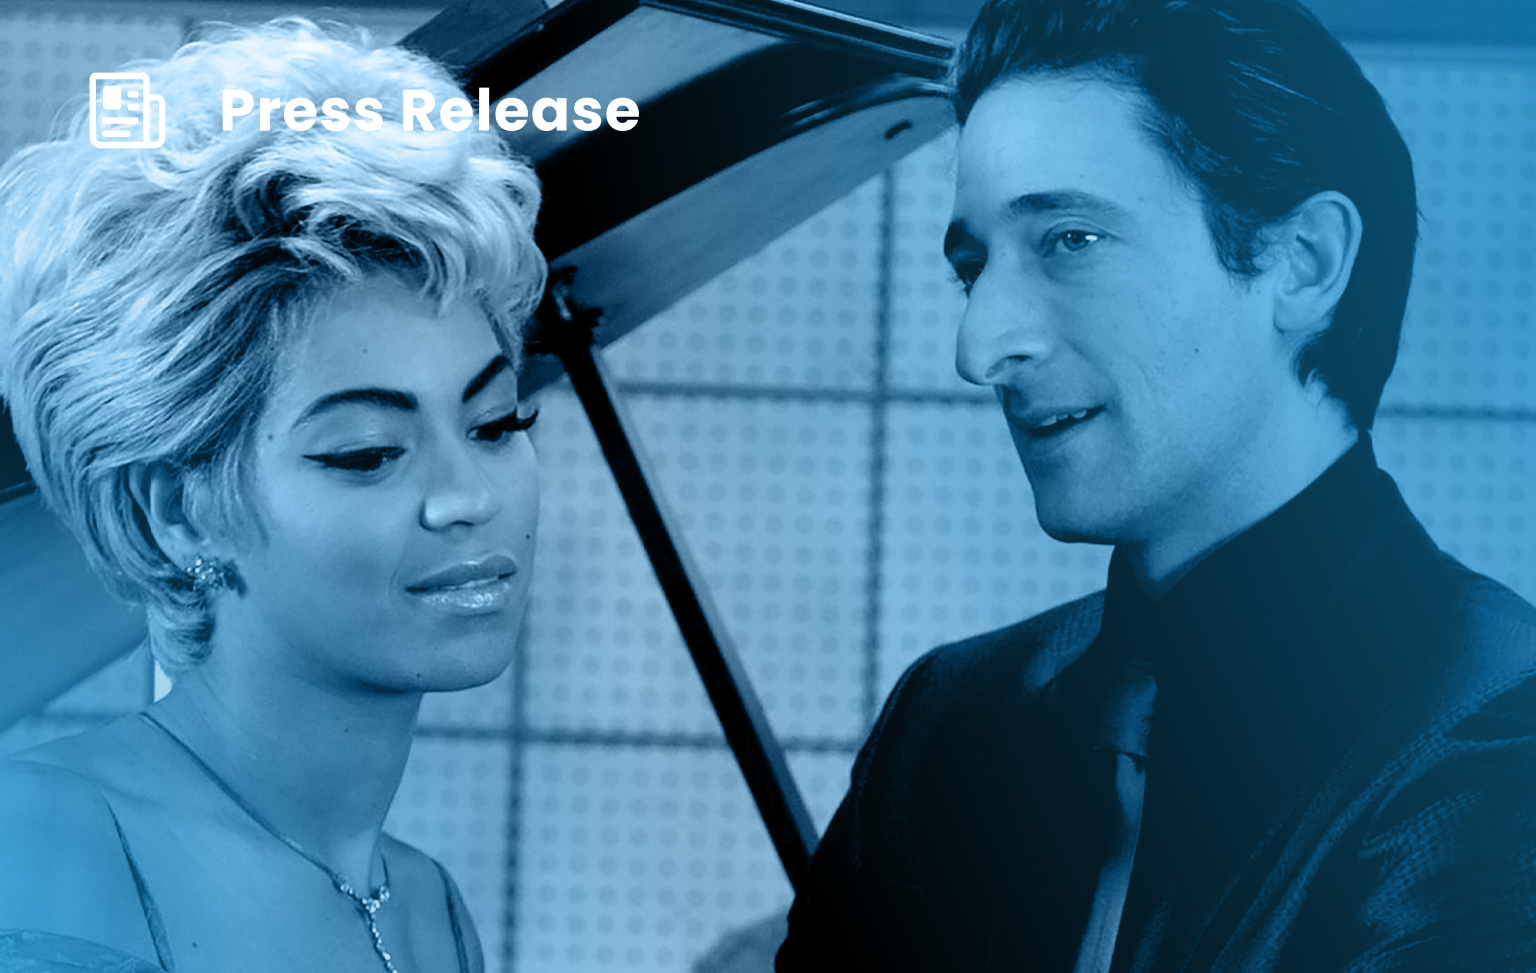 ANote brings the Cadillac Records Soundtrack with legendary Blues covers - including Beyoncé’s “At Last” - to music fans and investors